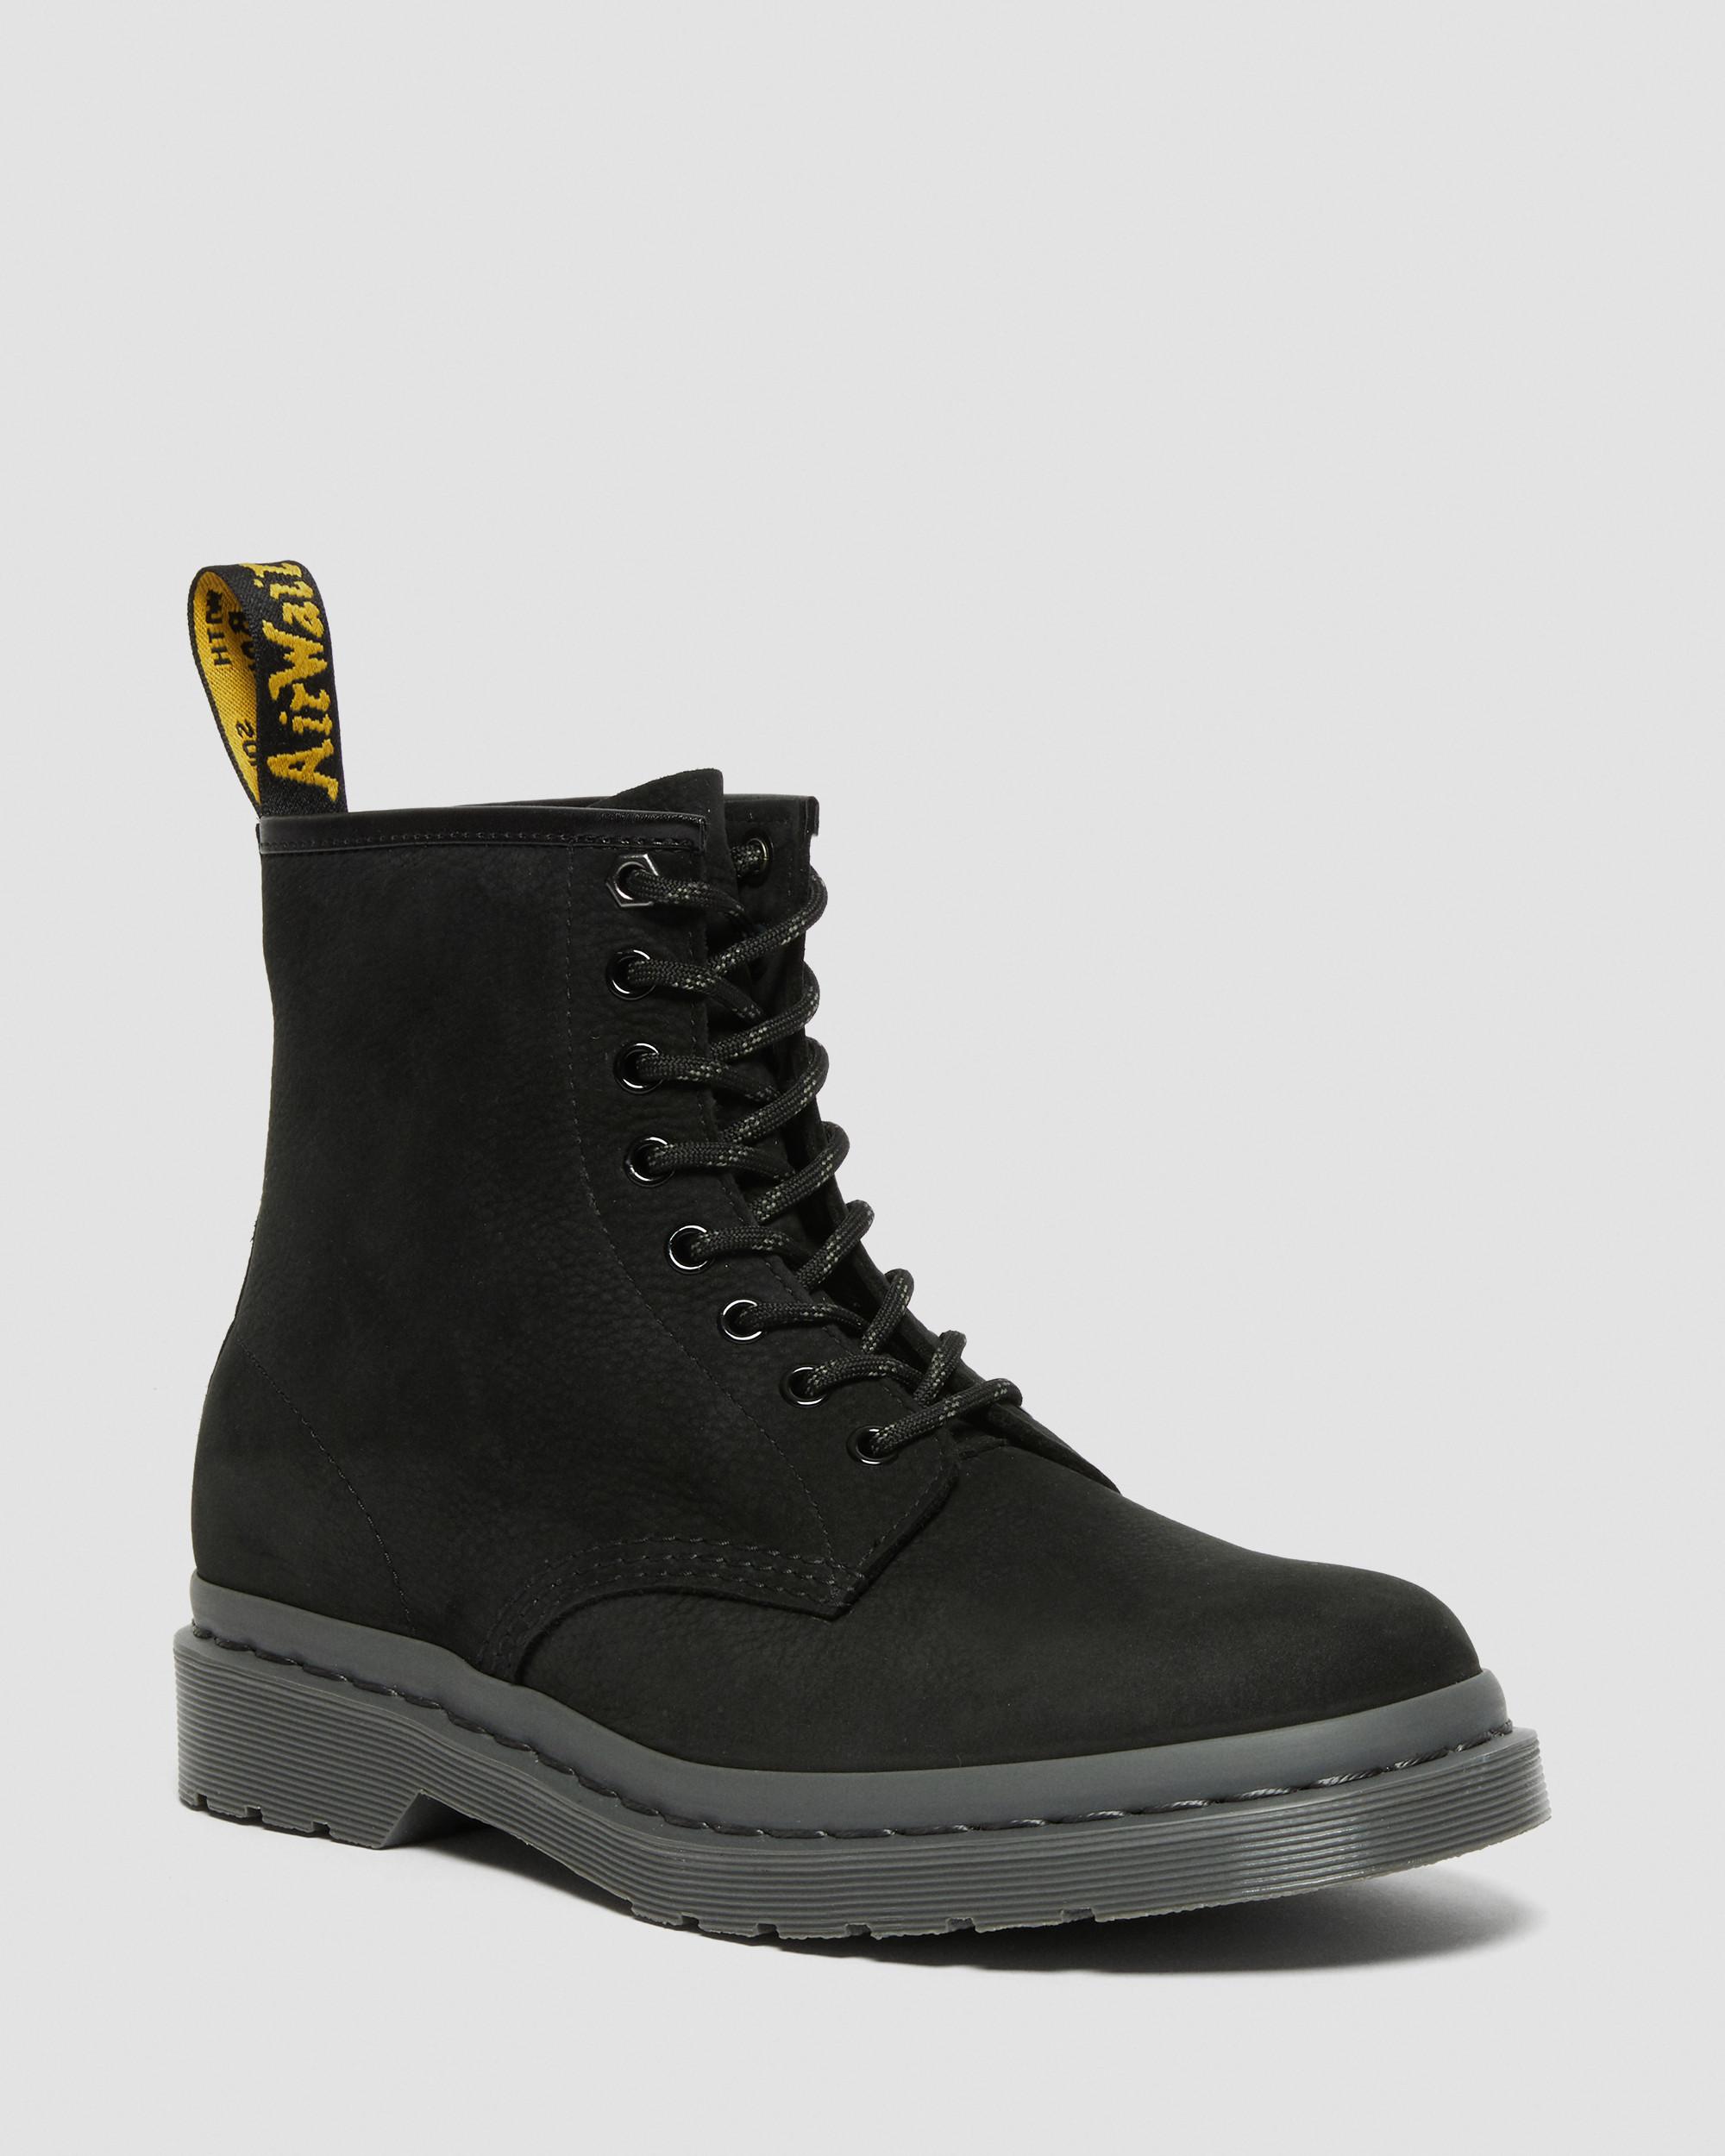 1460 Mono Milled Nubuck Leather Lace Up Boots, Black | Dr. Martens